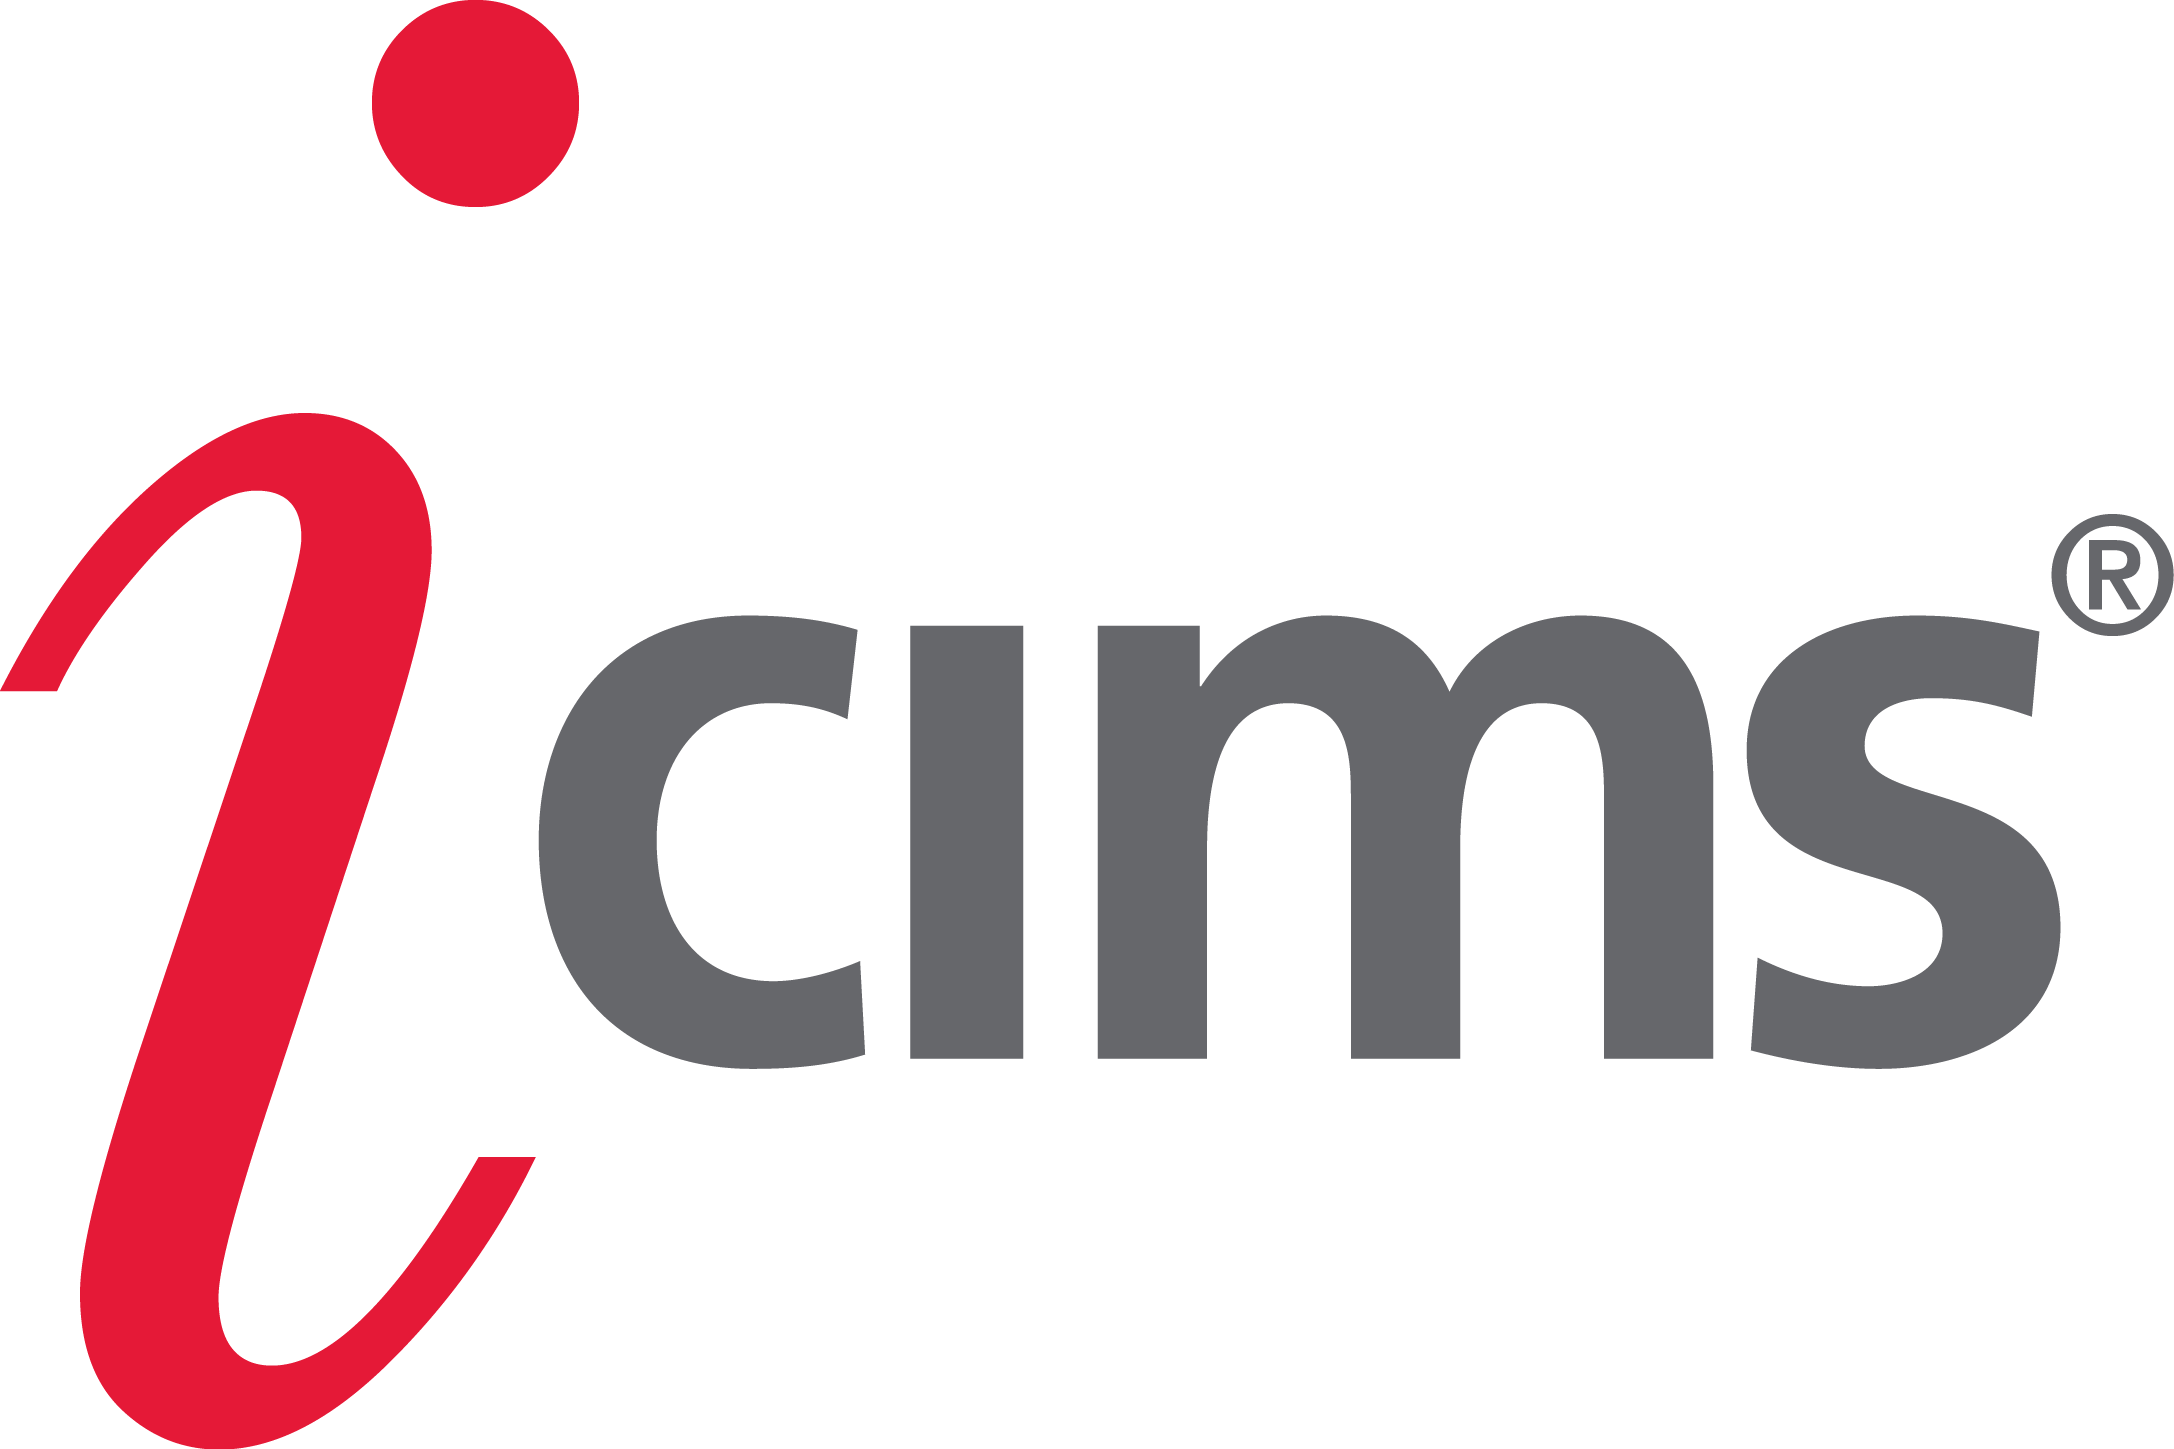 Choice Screening and iCIMS Announce Partnership to Address Complex Hiring Obstacles by Verifying Candidate Selection